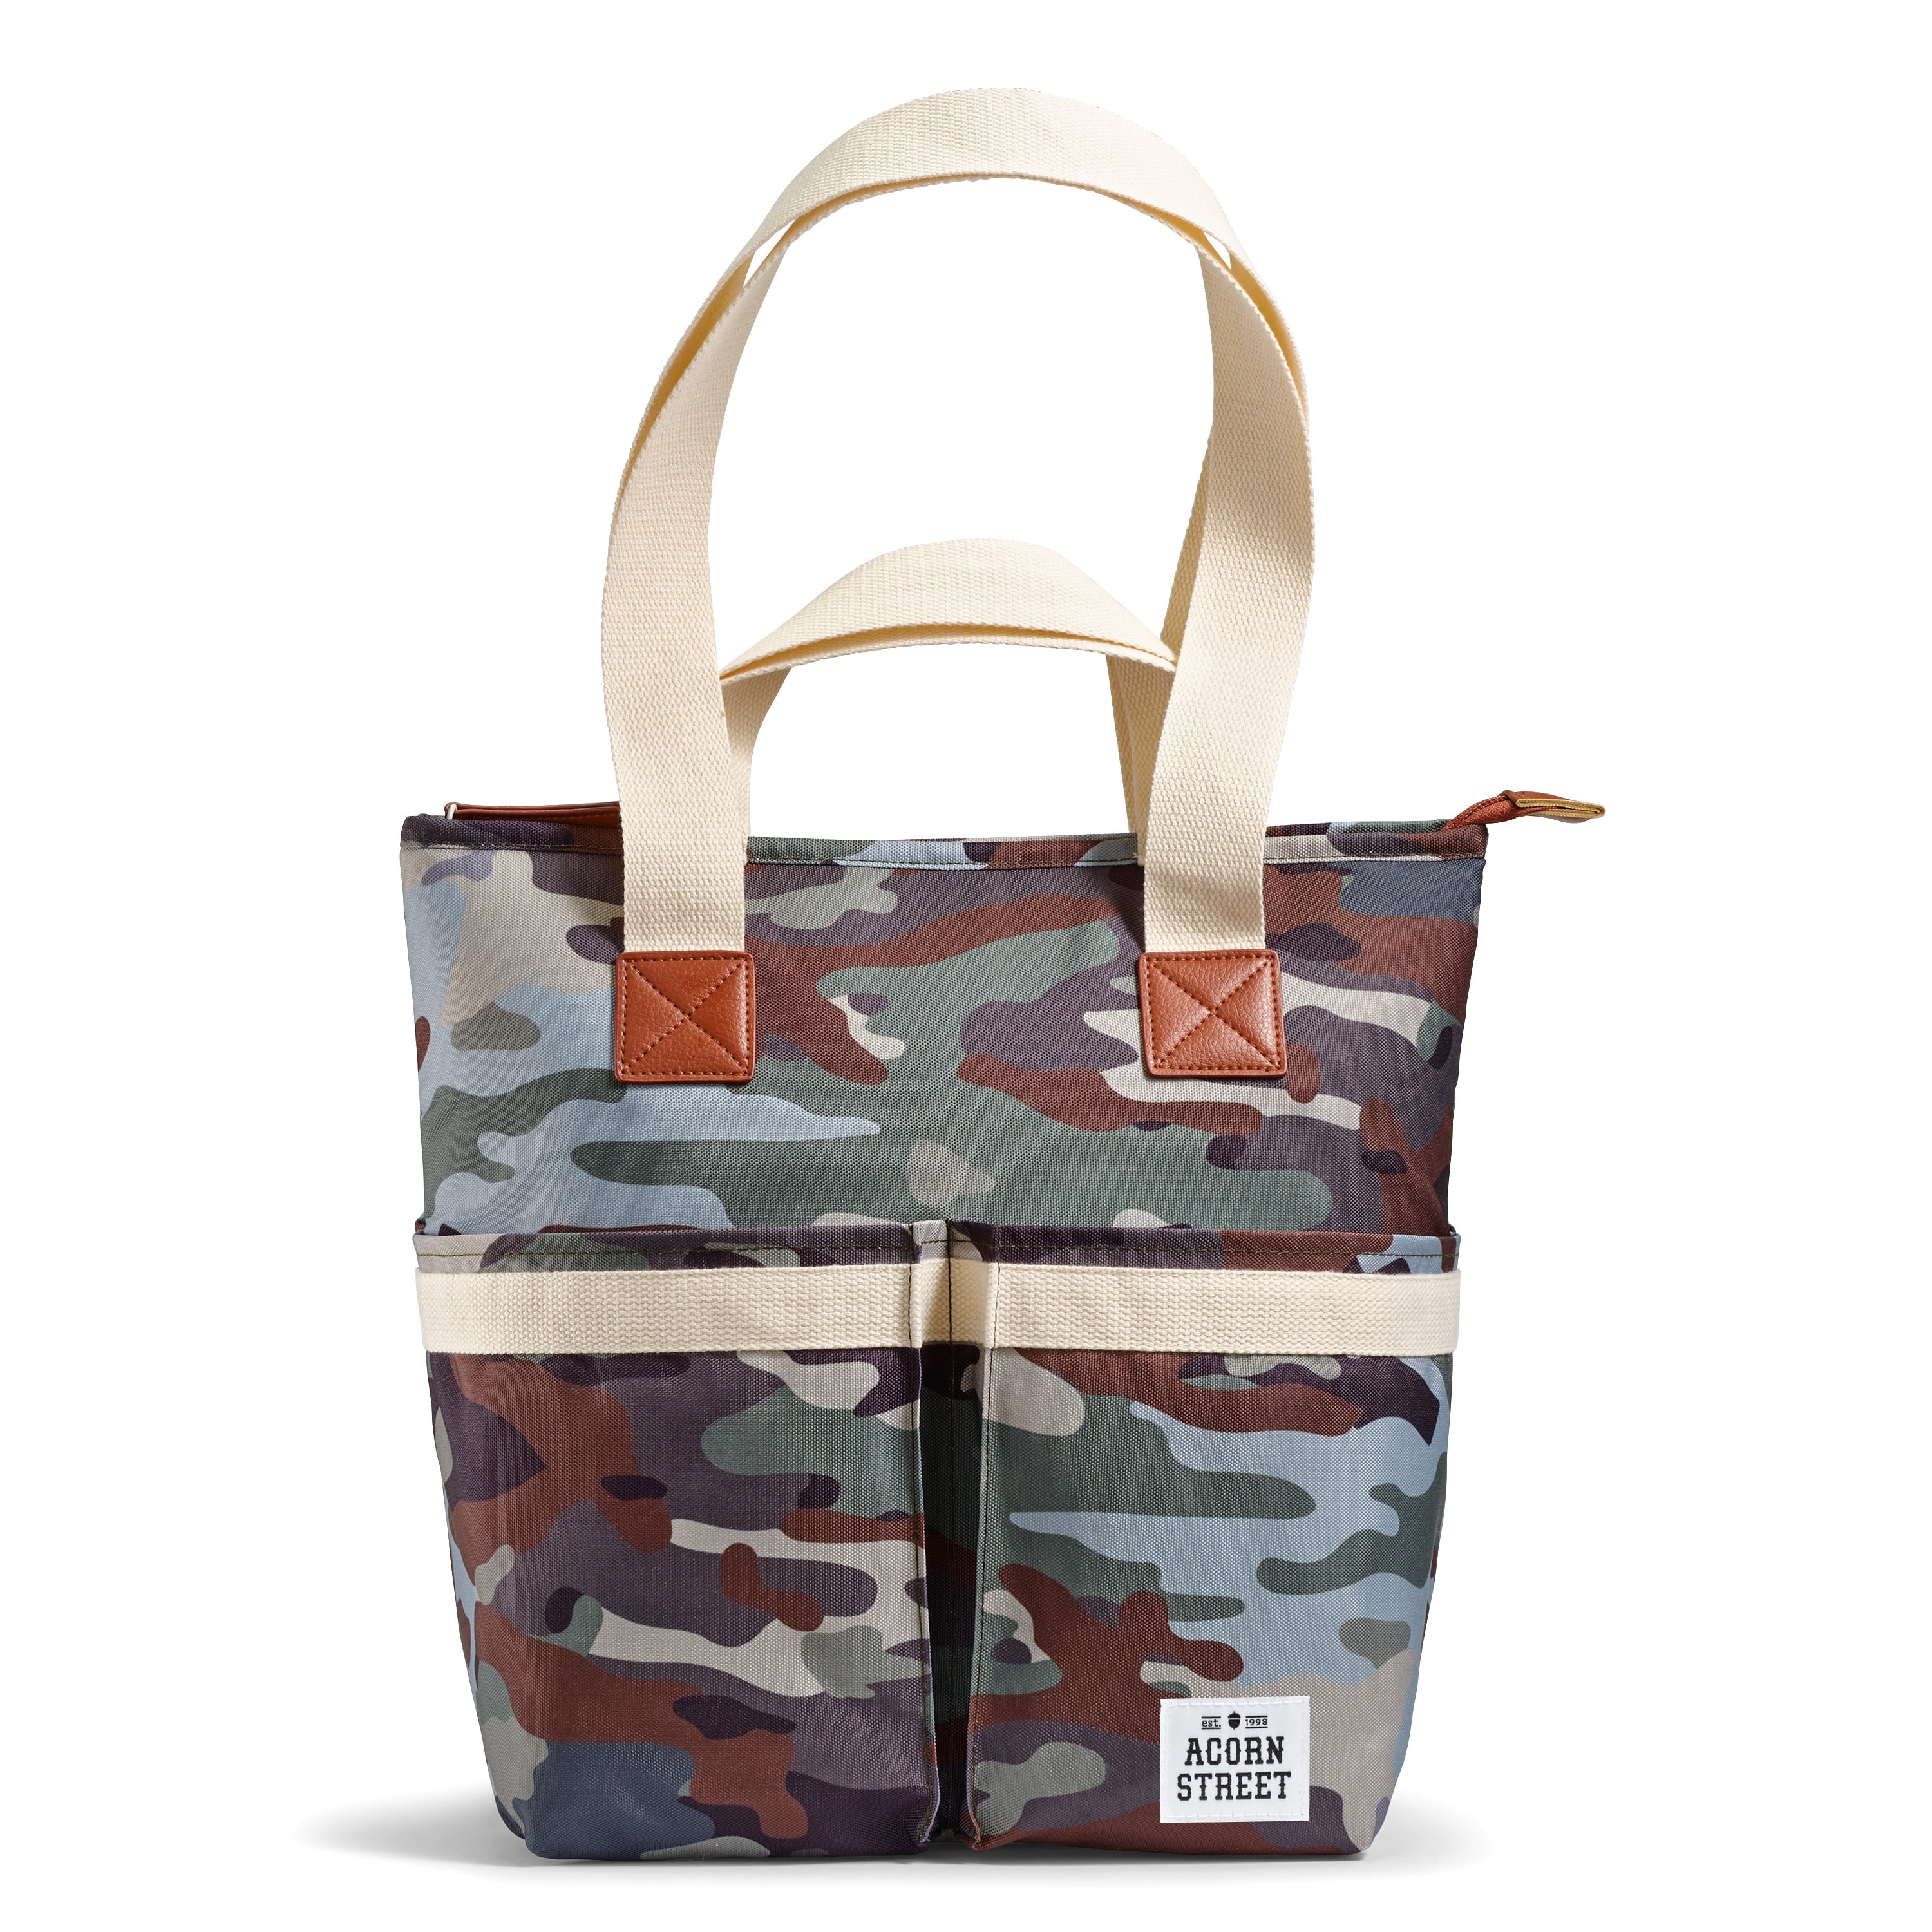 Acorn Street Insulated Cooler Tote Bag with Removable Divider, Woodland Camo, Size: One Size